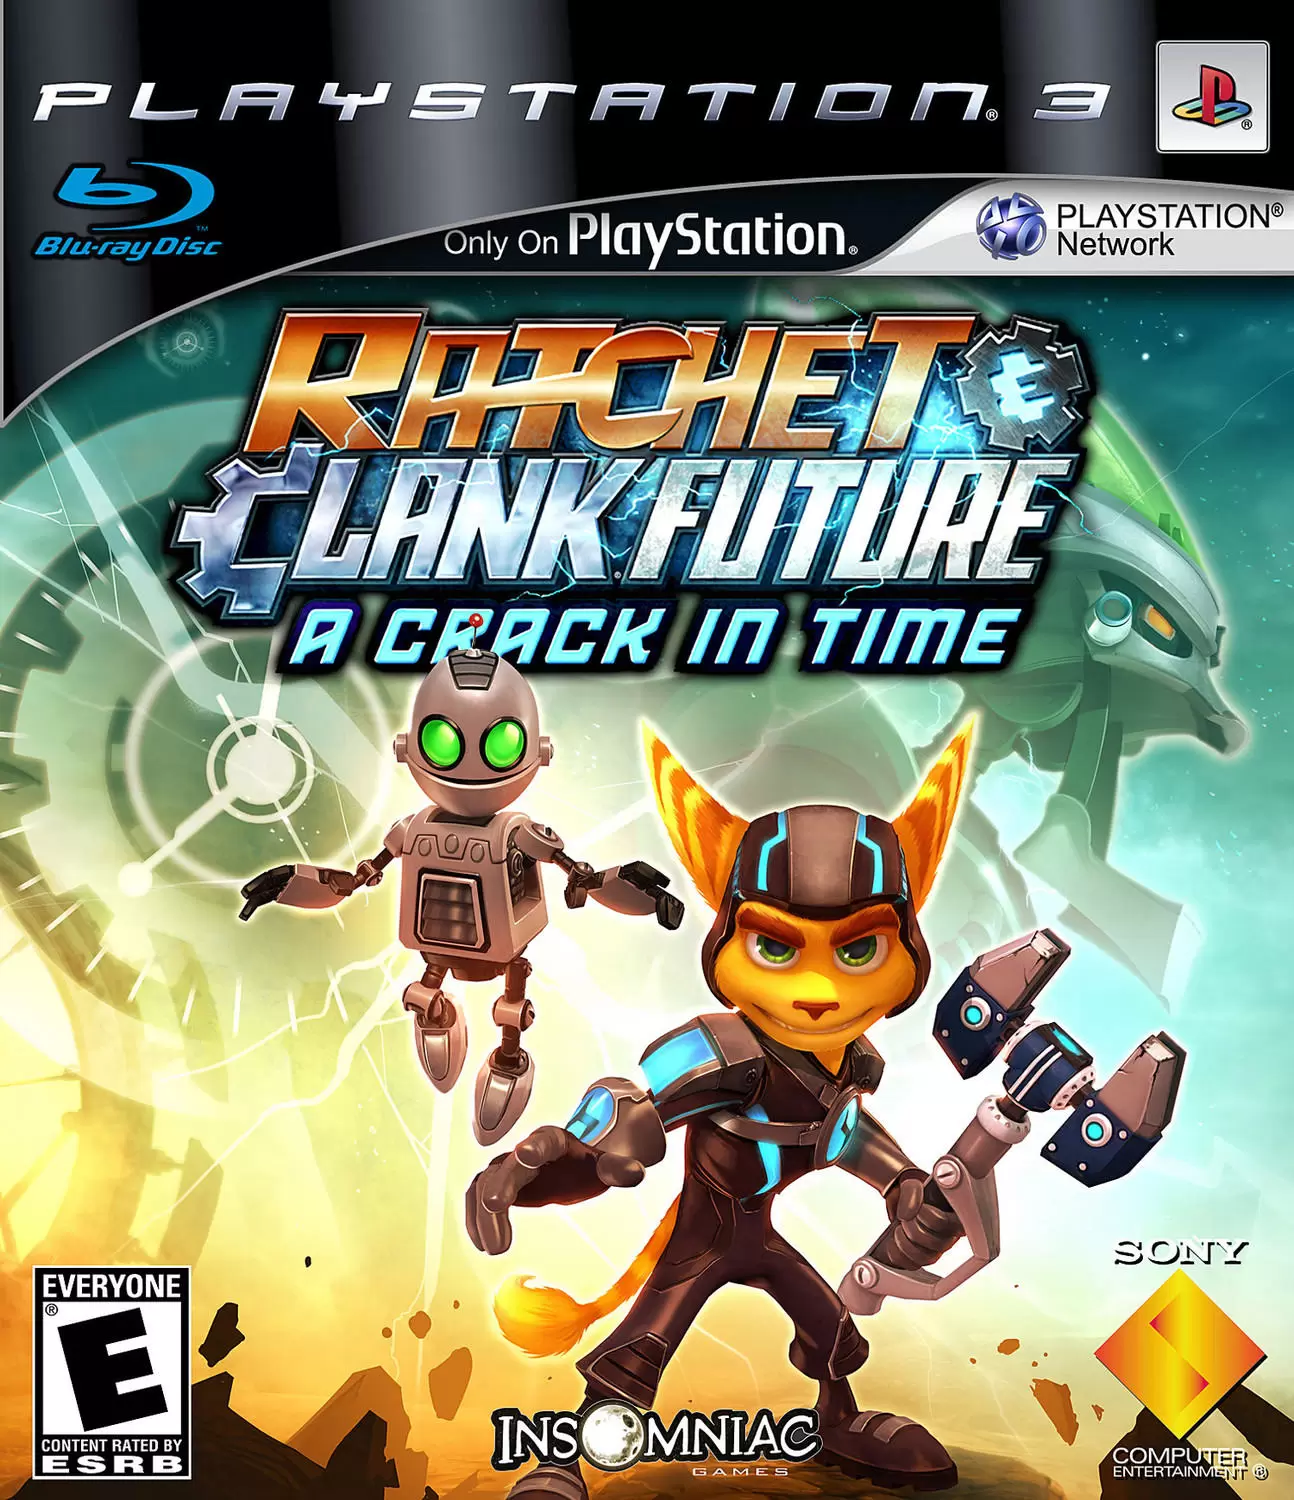 Jeux PS3 - Ratchet & Clank Future: A Crack in Time